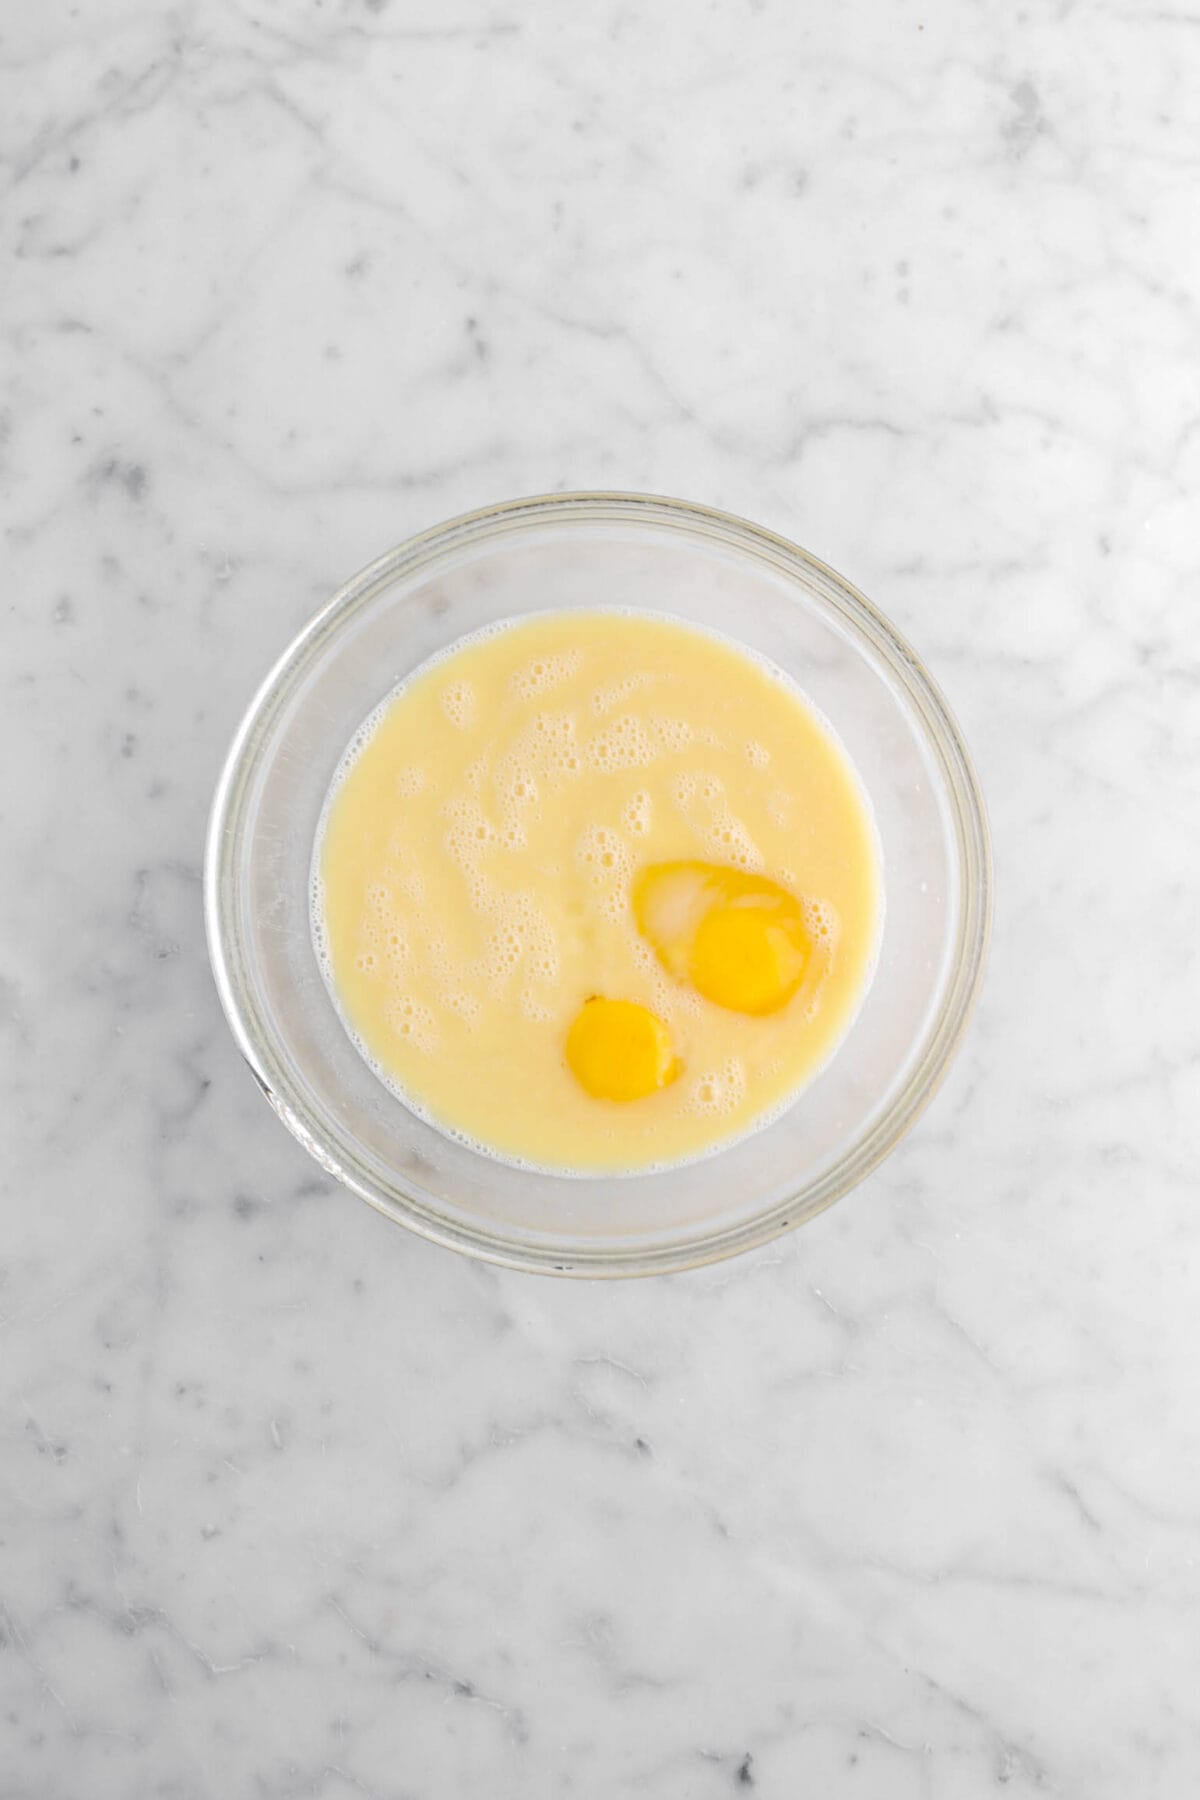 eggs added to evaporated milk mixture.